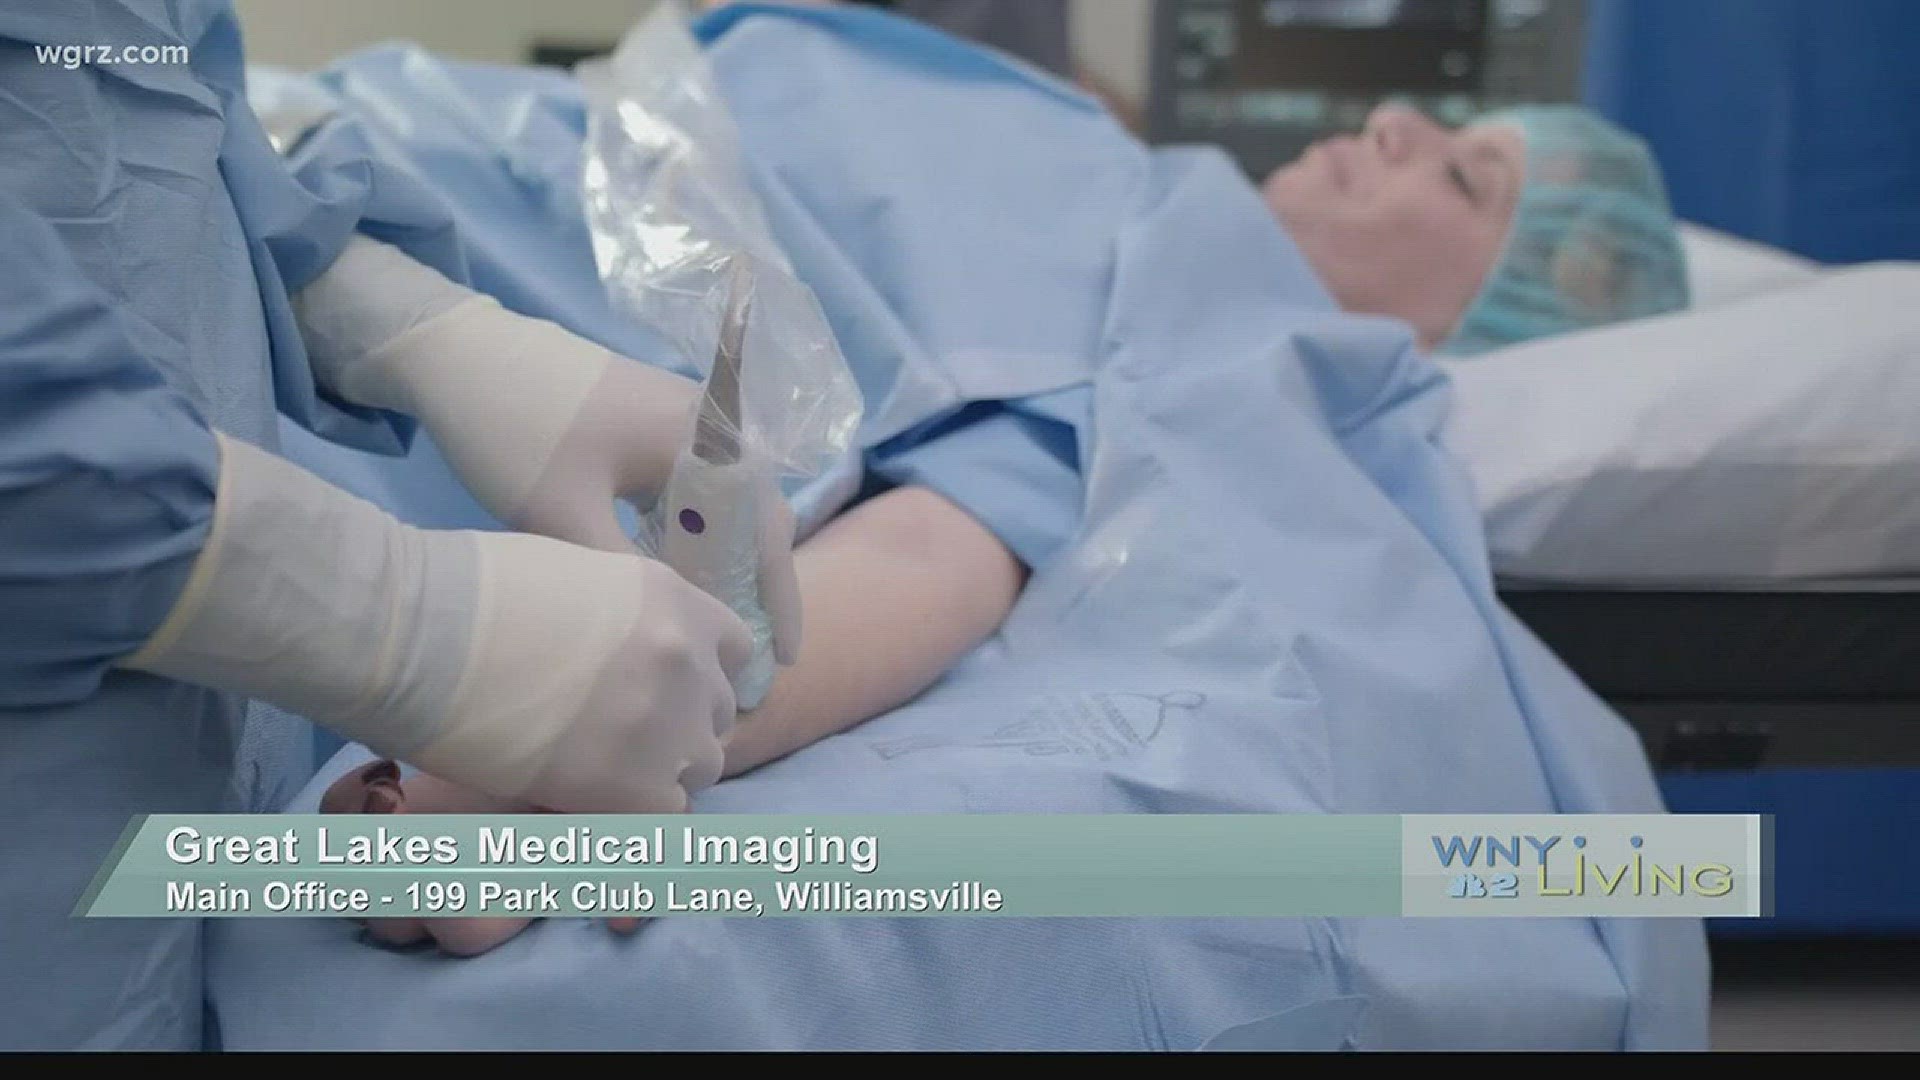 WNY Living - February 17 - Great Lakes Medical Imaging